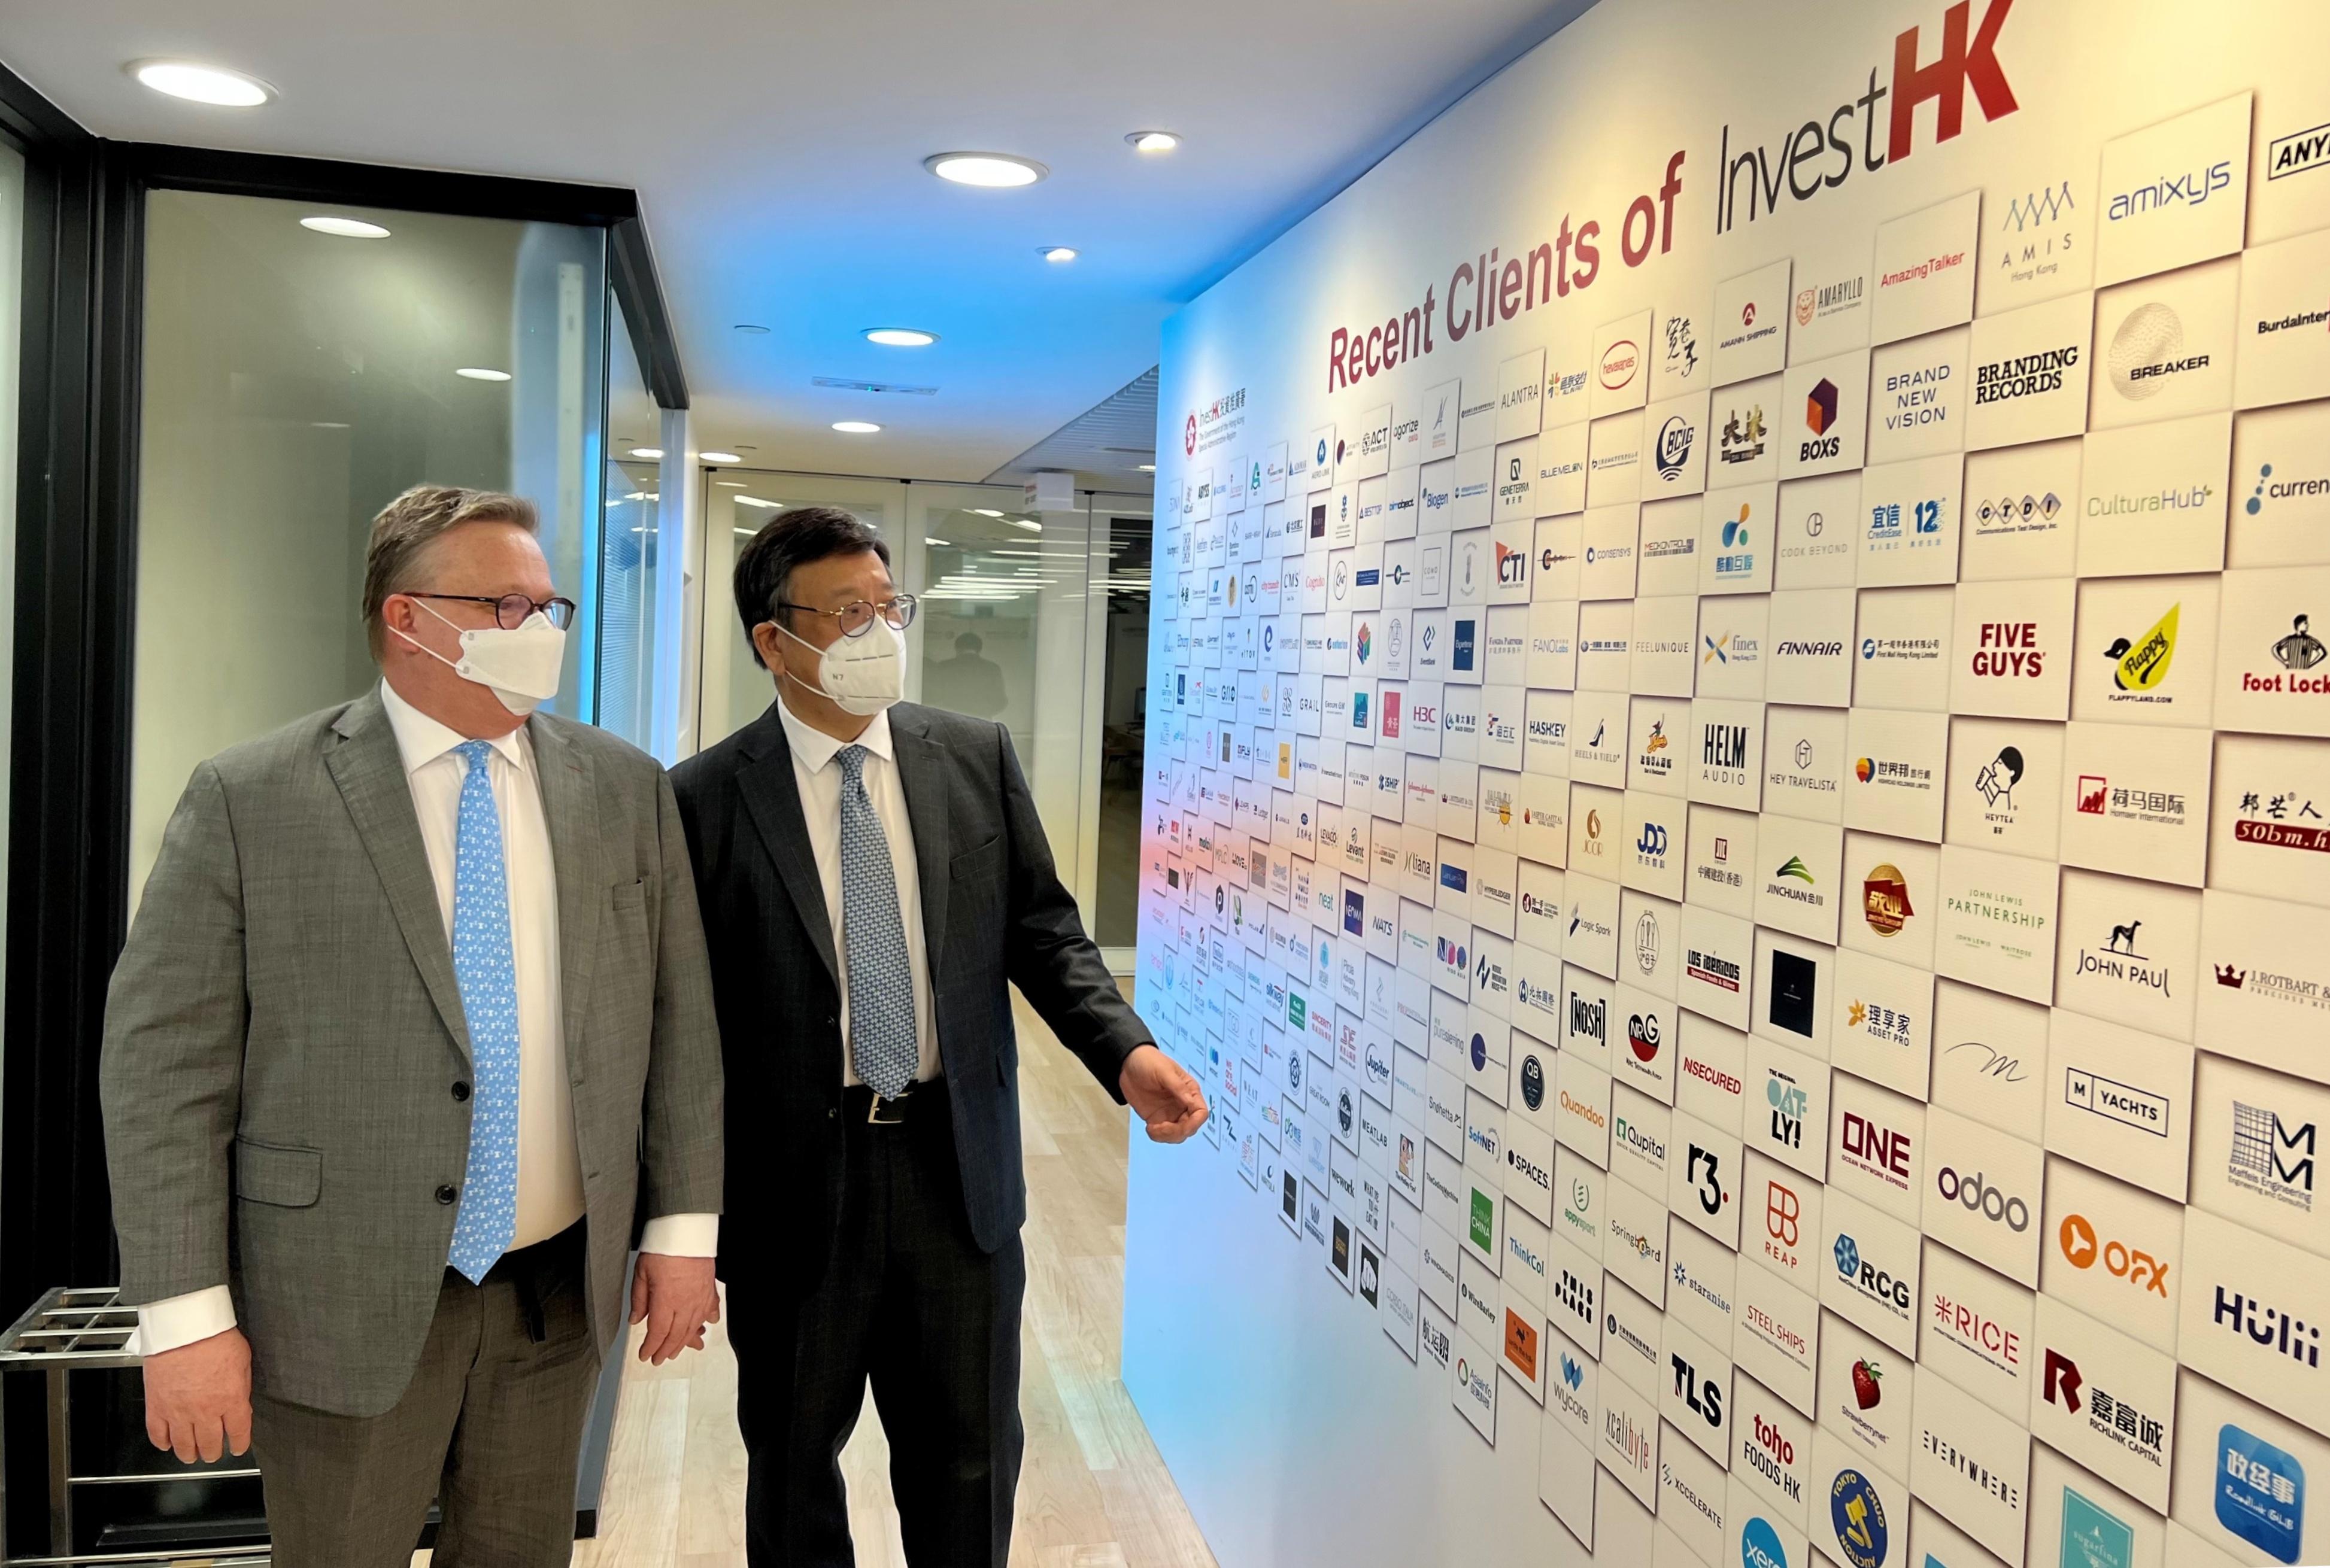 The Secretary for Commerce and Economic Development, Mr Algernon Yau (right), visited Invest Hong Kong earlier to learn about the latest work in attracting foreign direct investment and supporting overseas and Mainland companies to set up or expand in Hong Kong. Looking on is the Director-General of Investment Promotion, Mr Stephen Phillips.